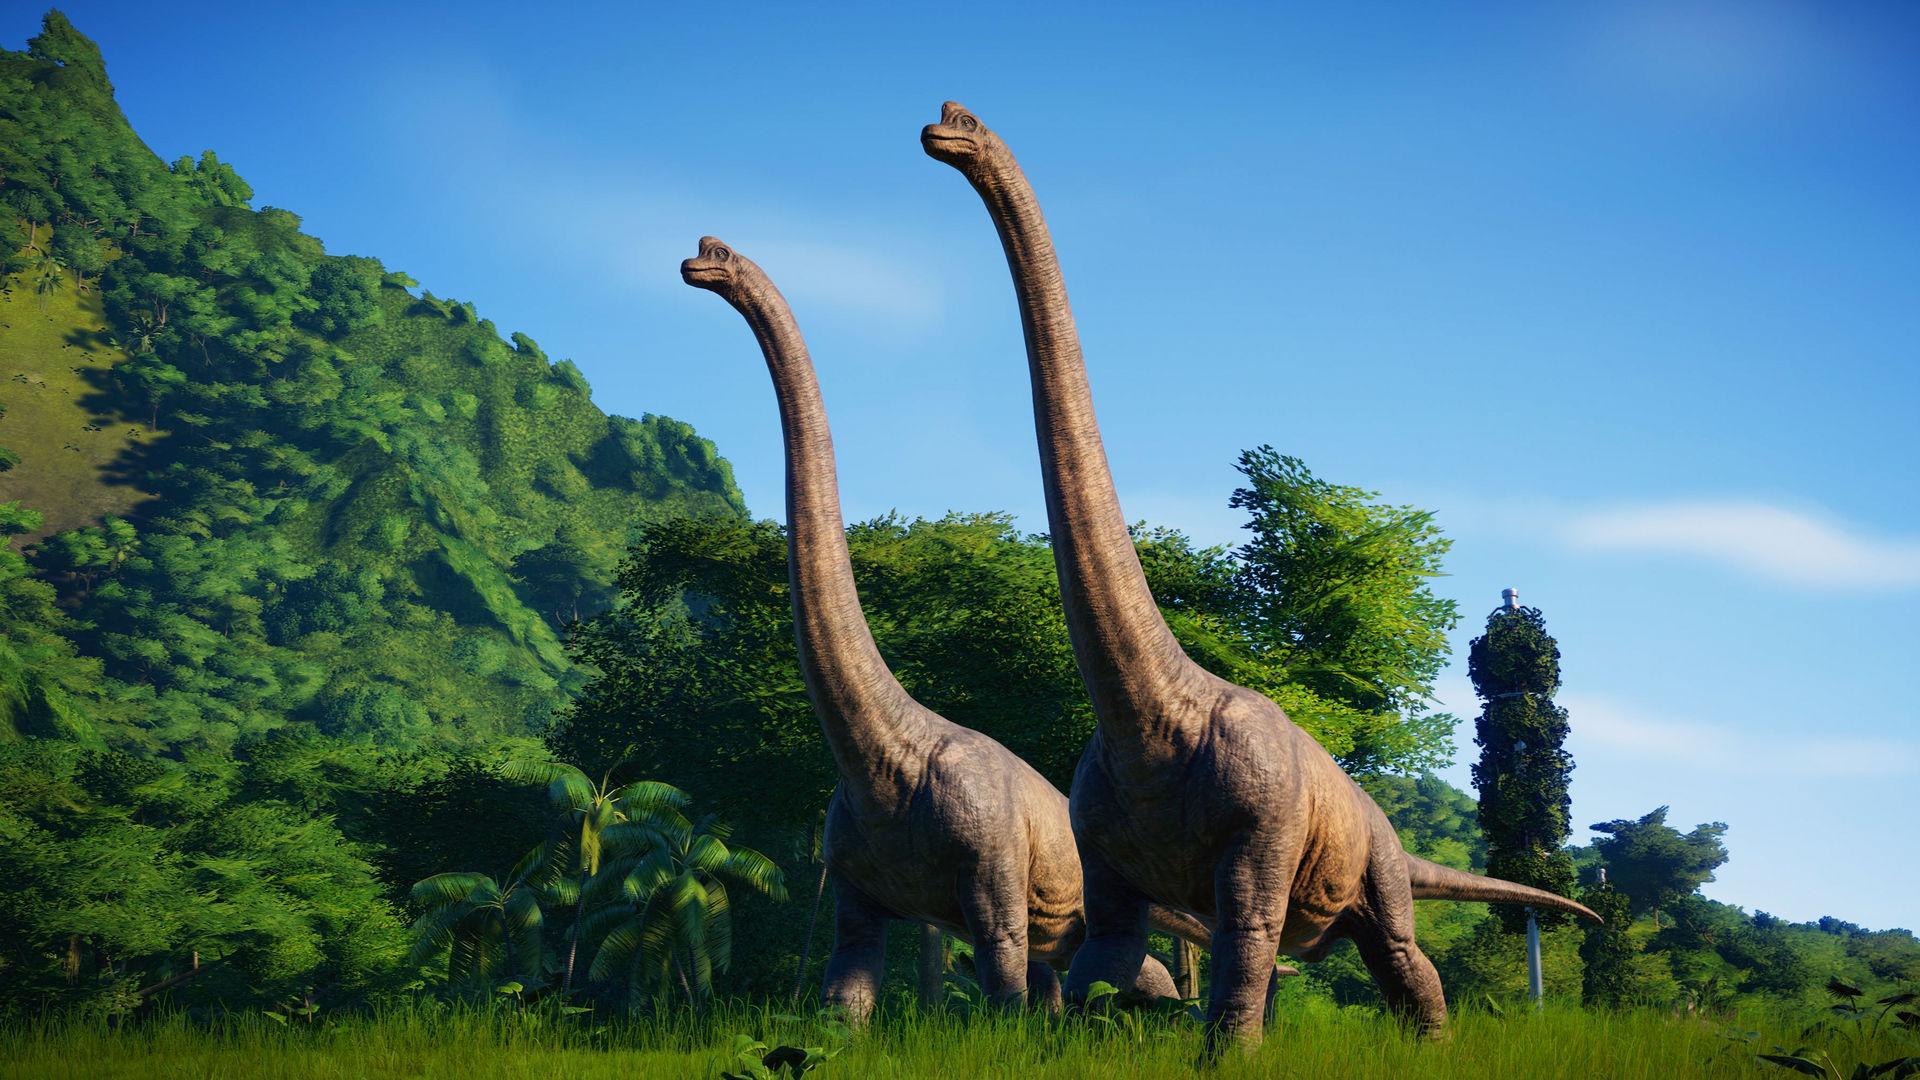 Jurassic World Evolution is so close to being the game I've waited years for